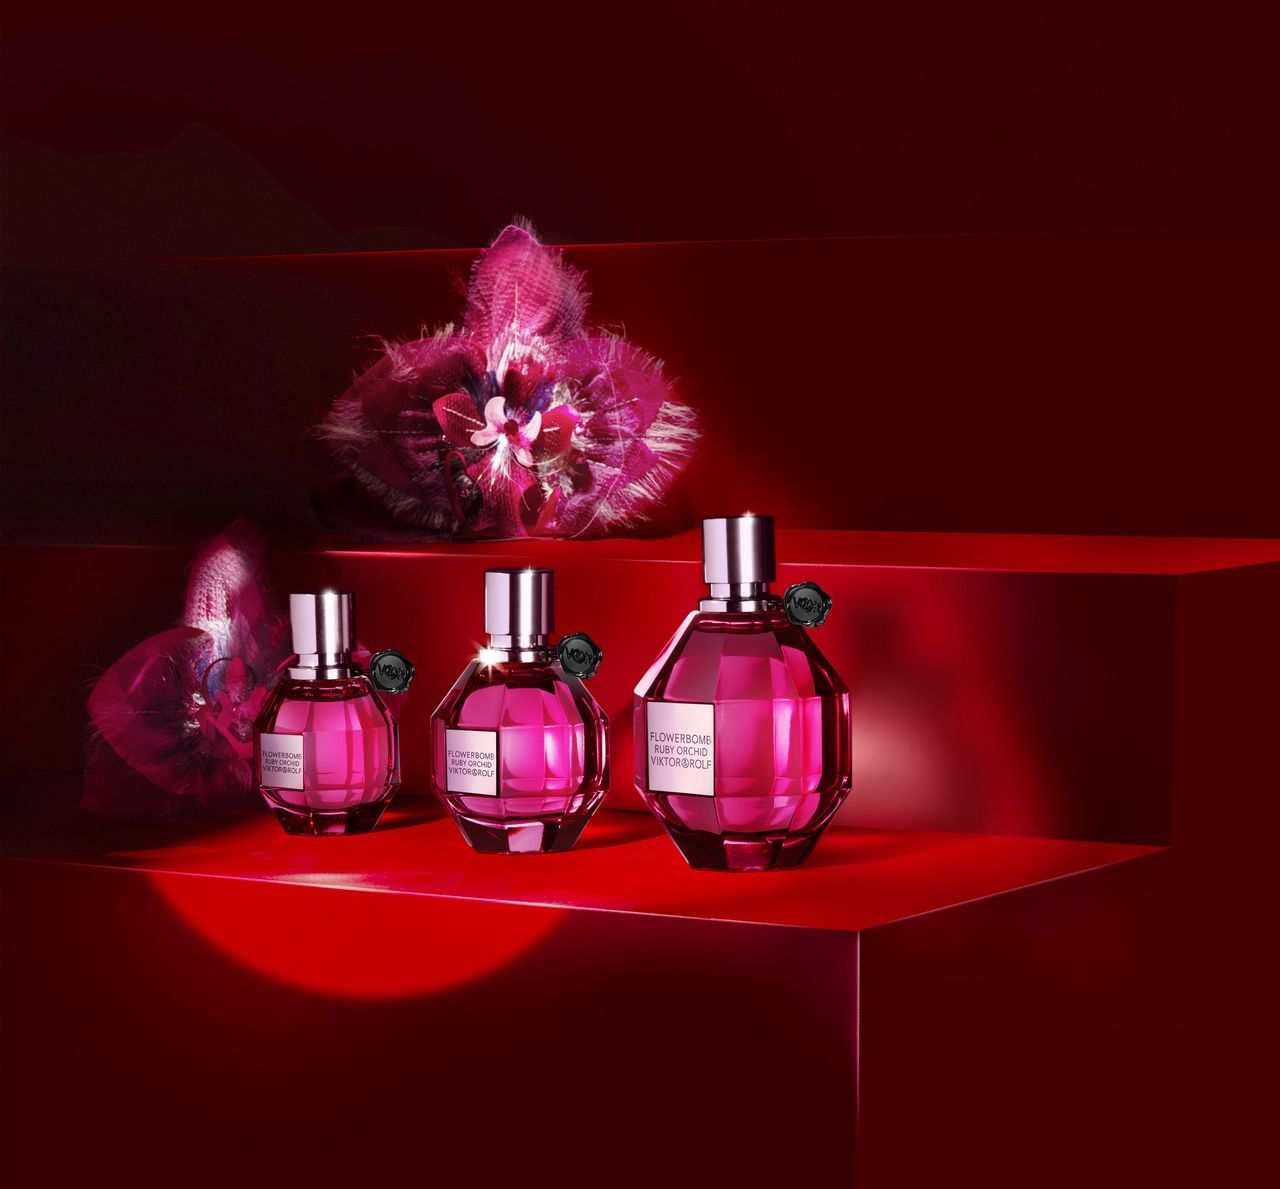 Flowerbomb Ruby Orchid od Victor & Rolf 